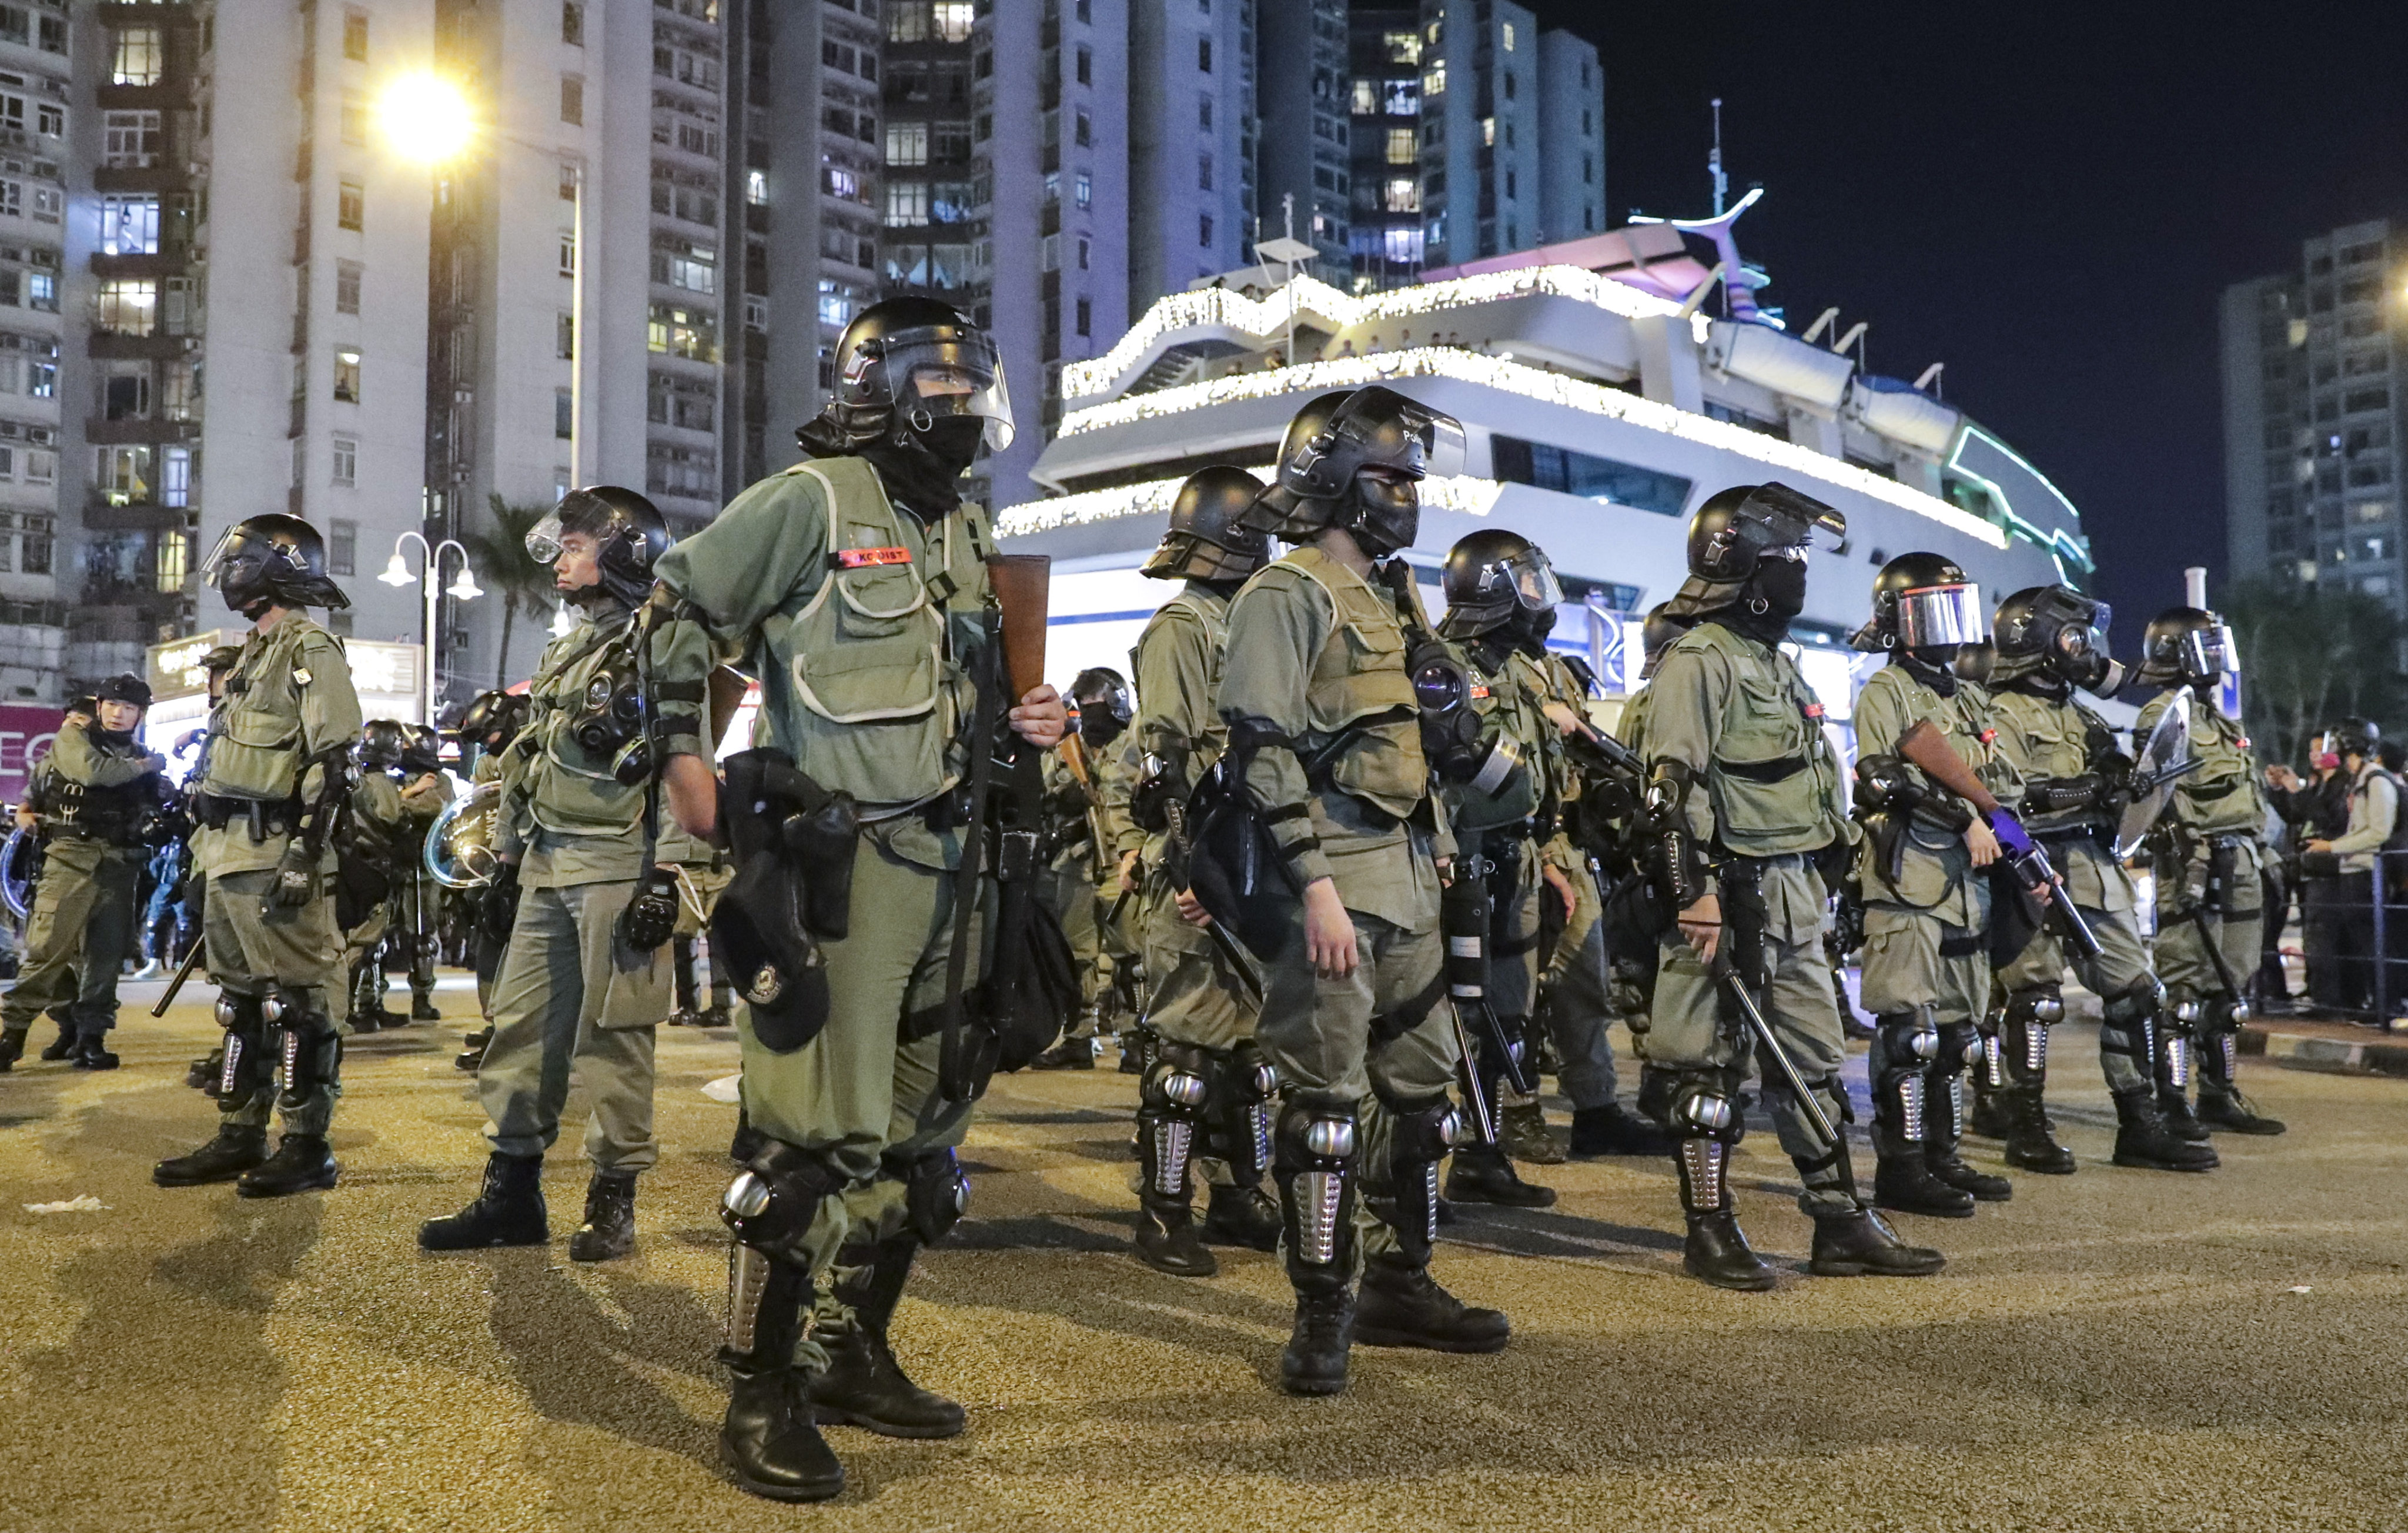 Riot police in Whampoa, Hung Hom, after anti-government protesters vandalised several shops in the area. Photo: Edmond So